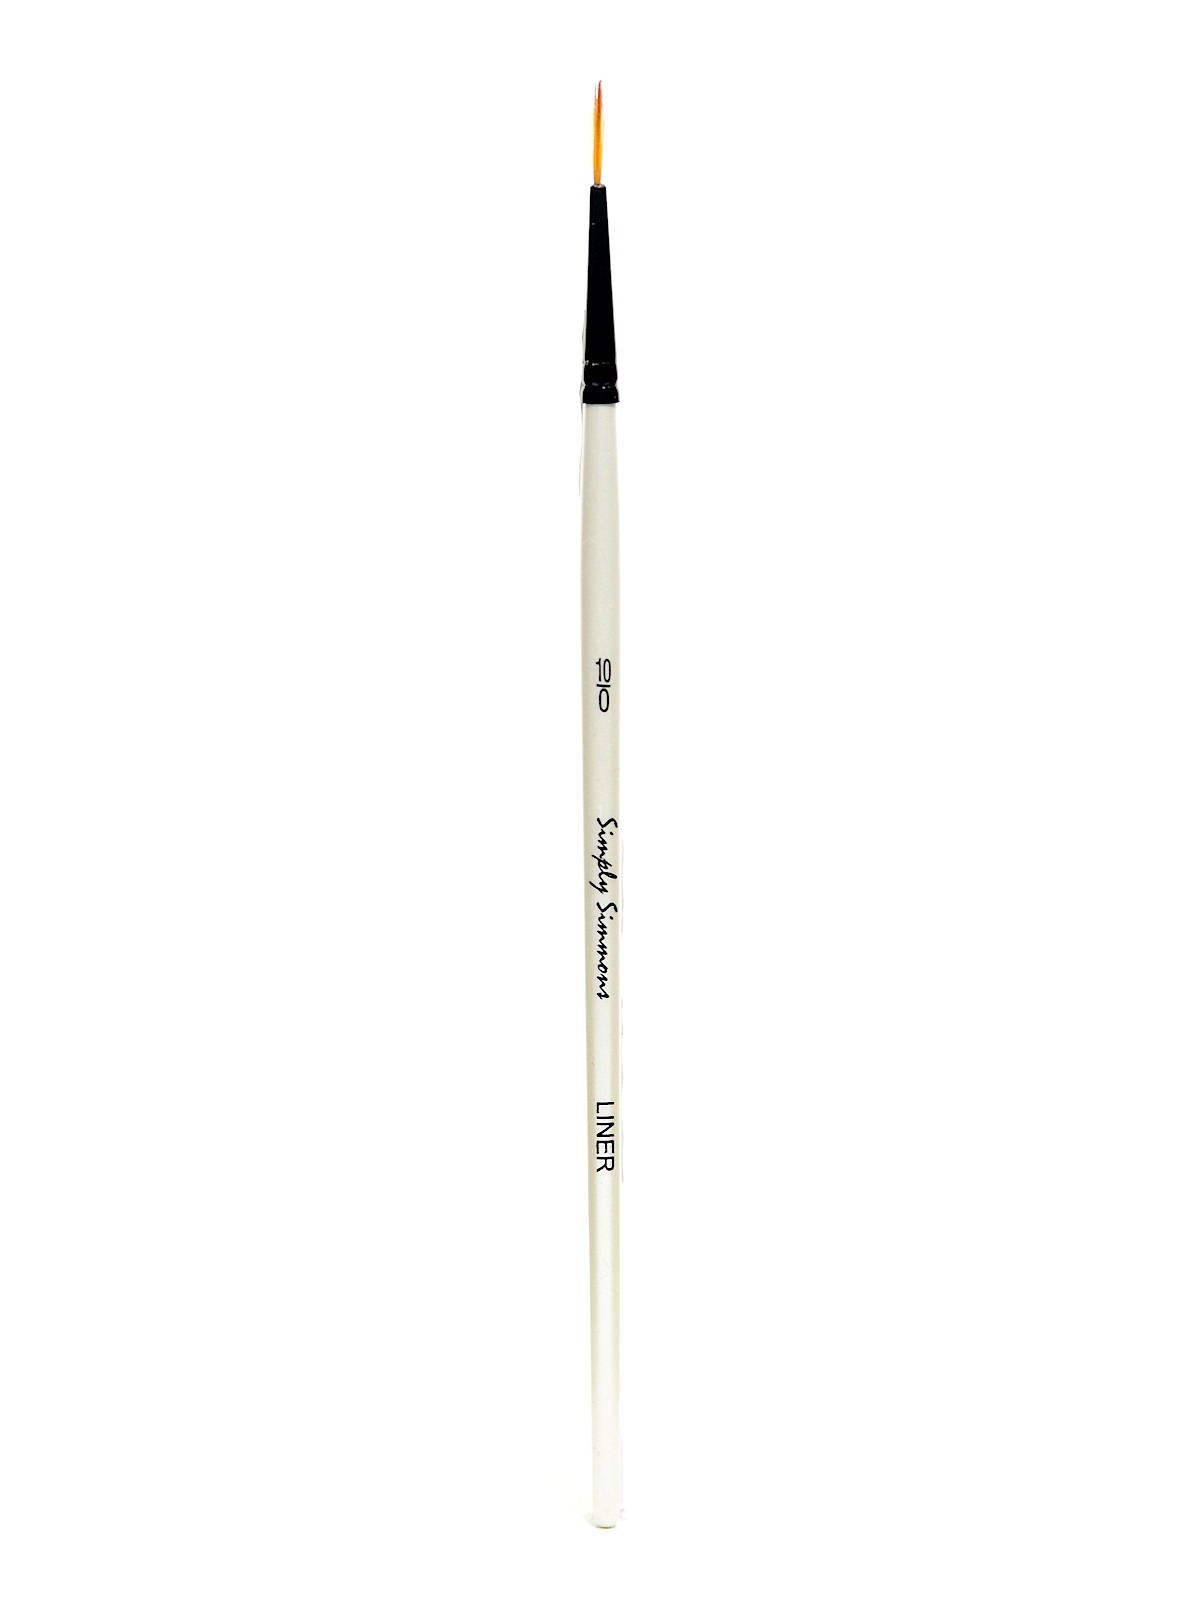 Simply Simmons Short Handle Brushes Liner 10 0